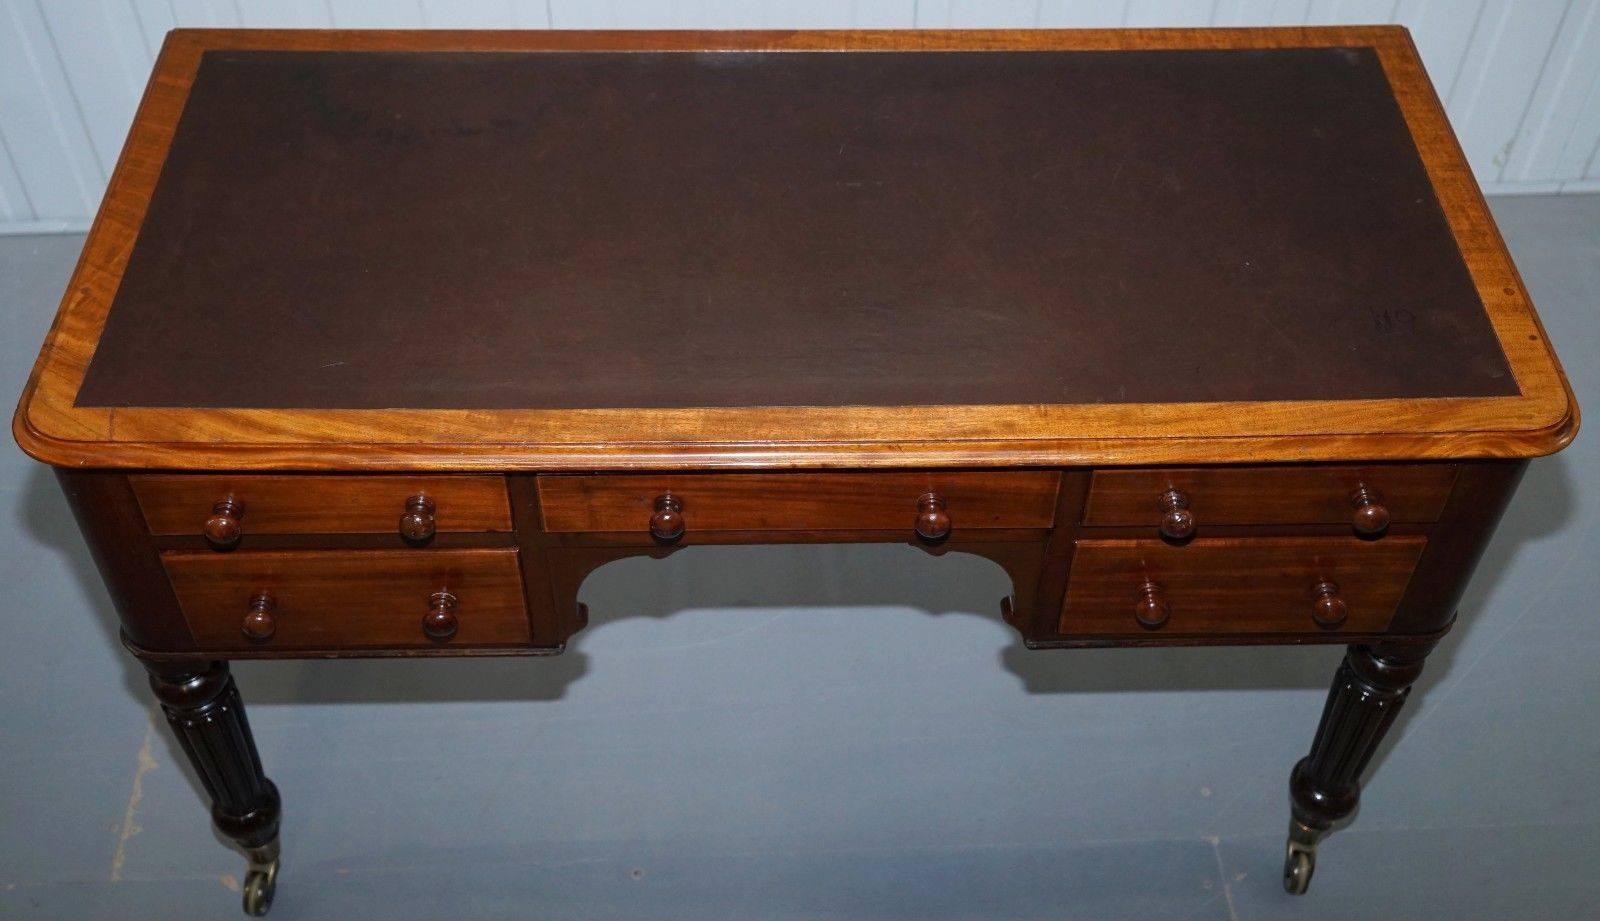 British Stunning in the Manner of Gillows Period Victorian Mahogany Writing Desk, 1860